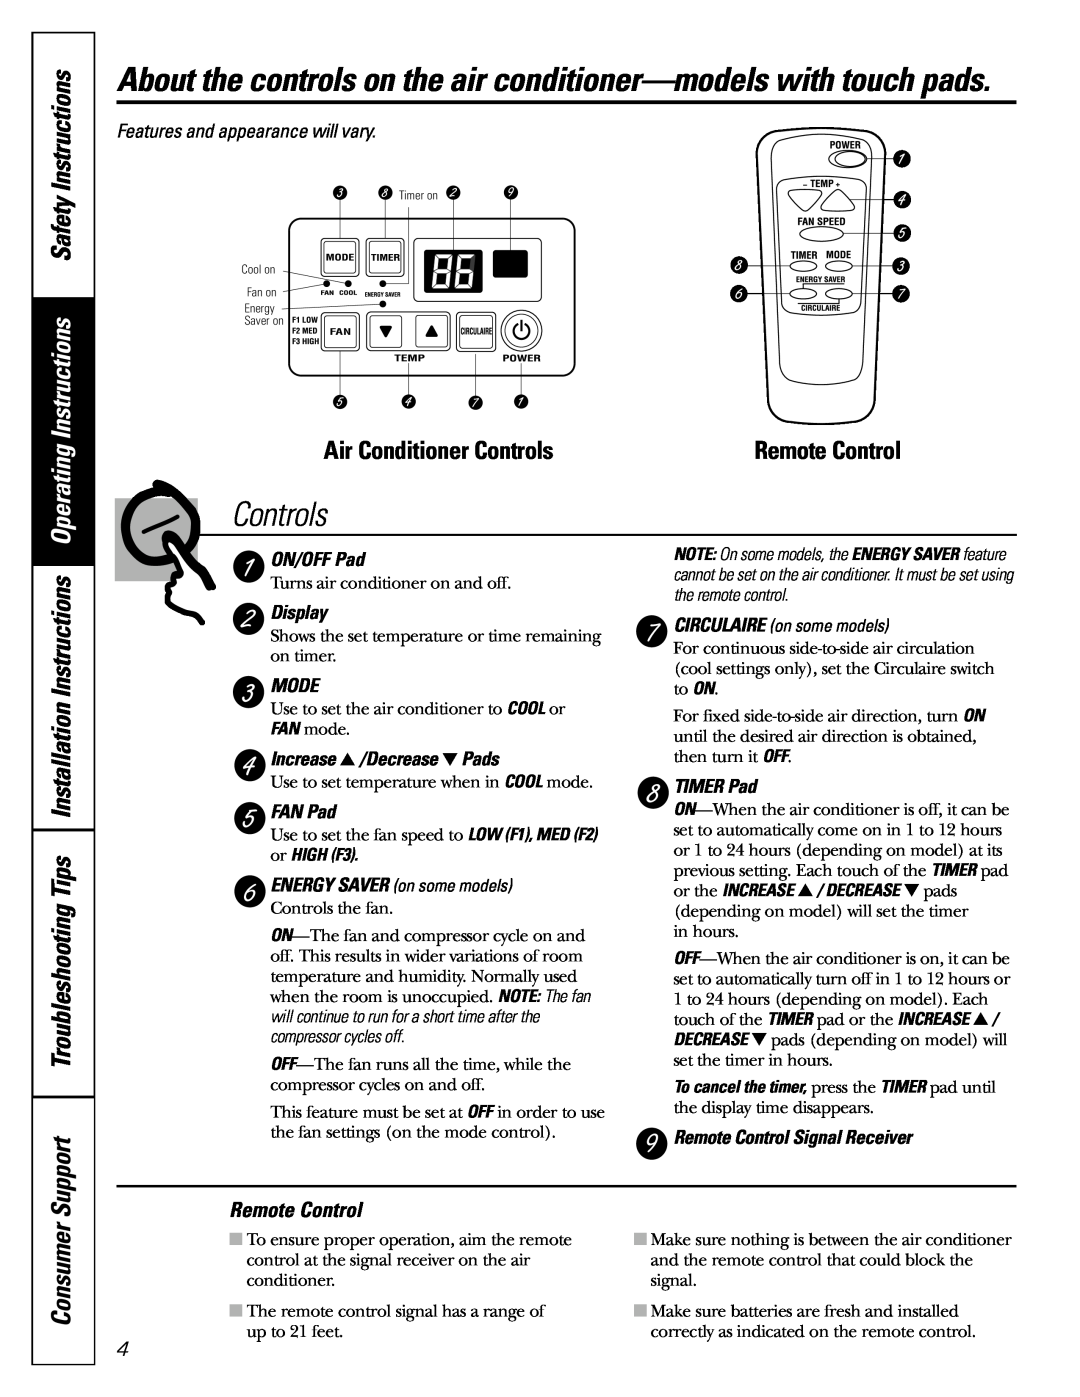 GE AGL24 Operating Instructions Safety Instructions, Air Conditioner ControlsRemote Control, Consumer, ON/OFF Pad 